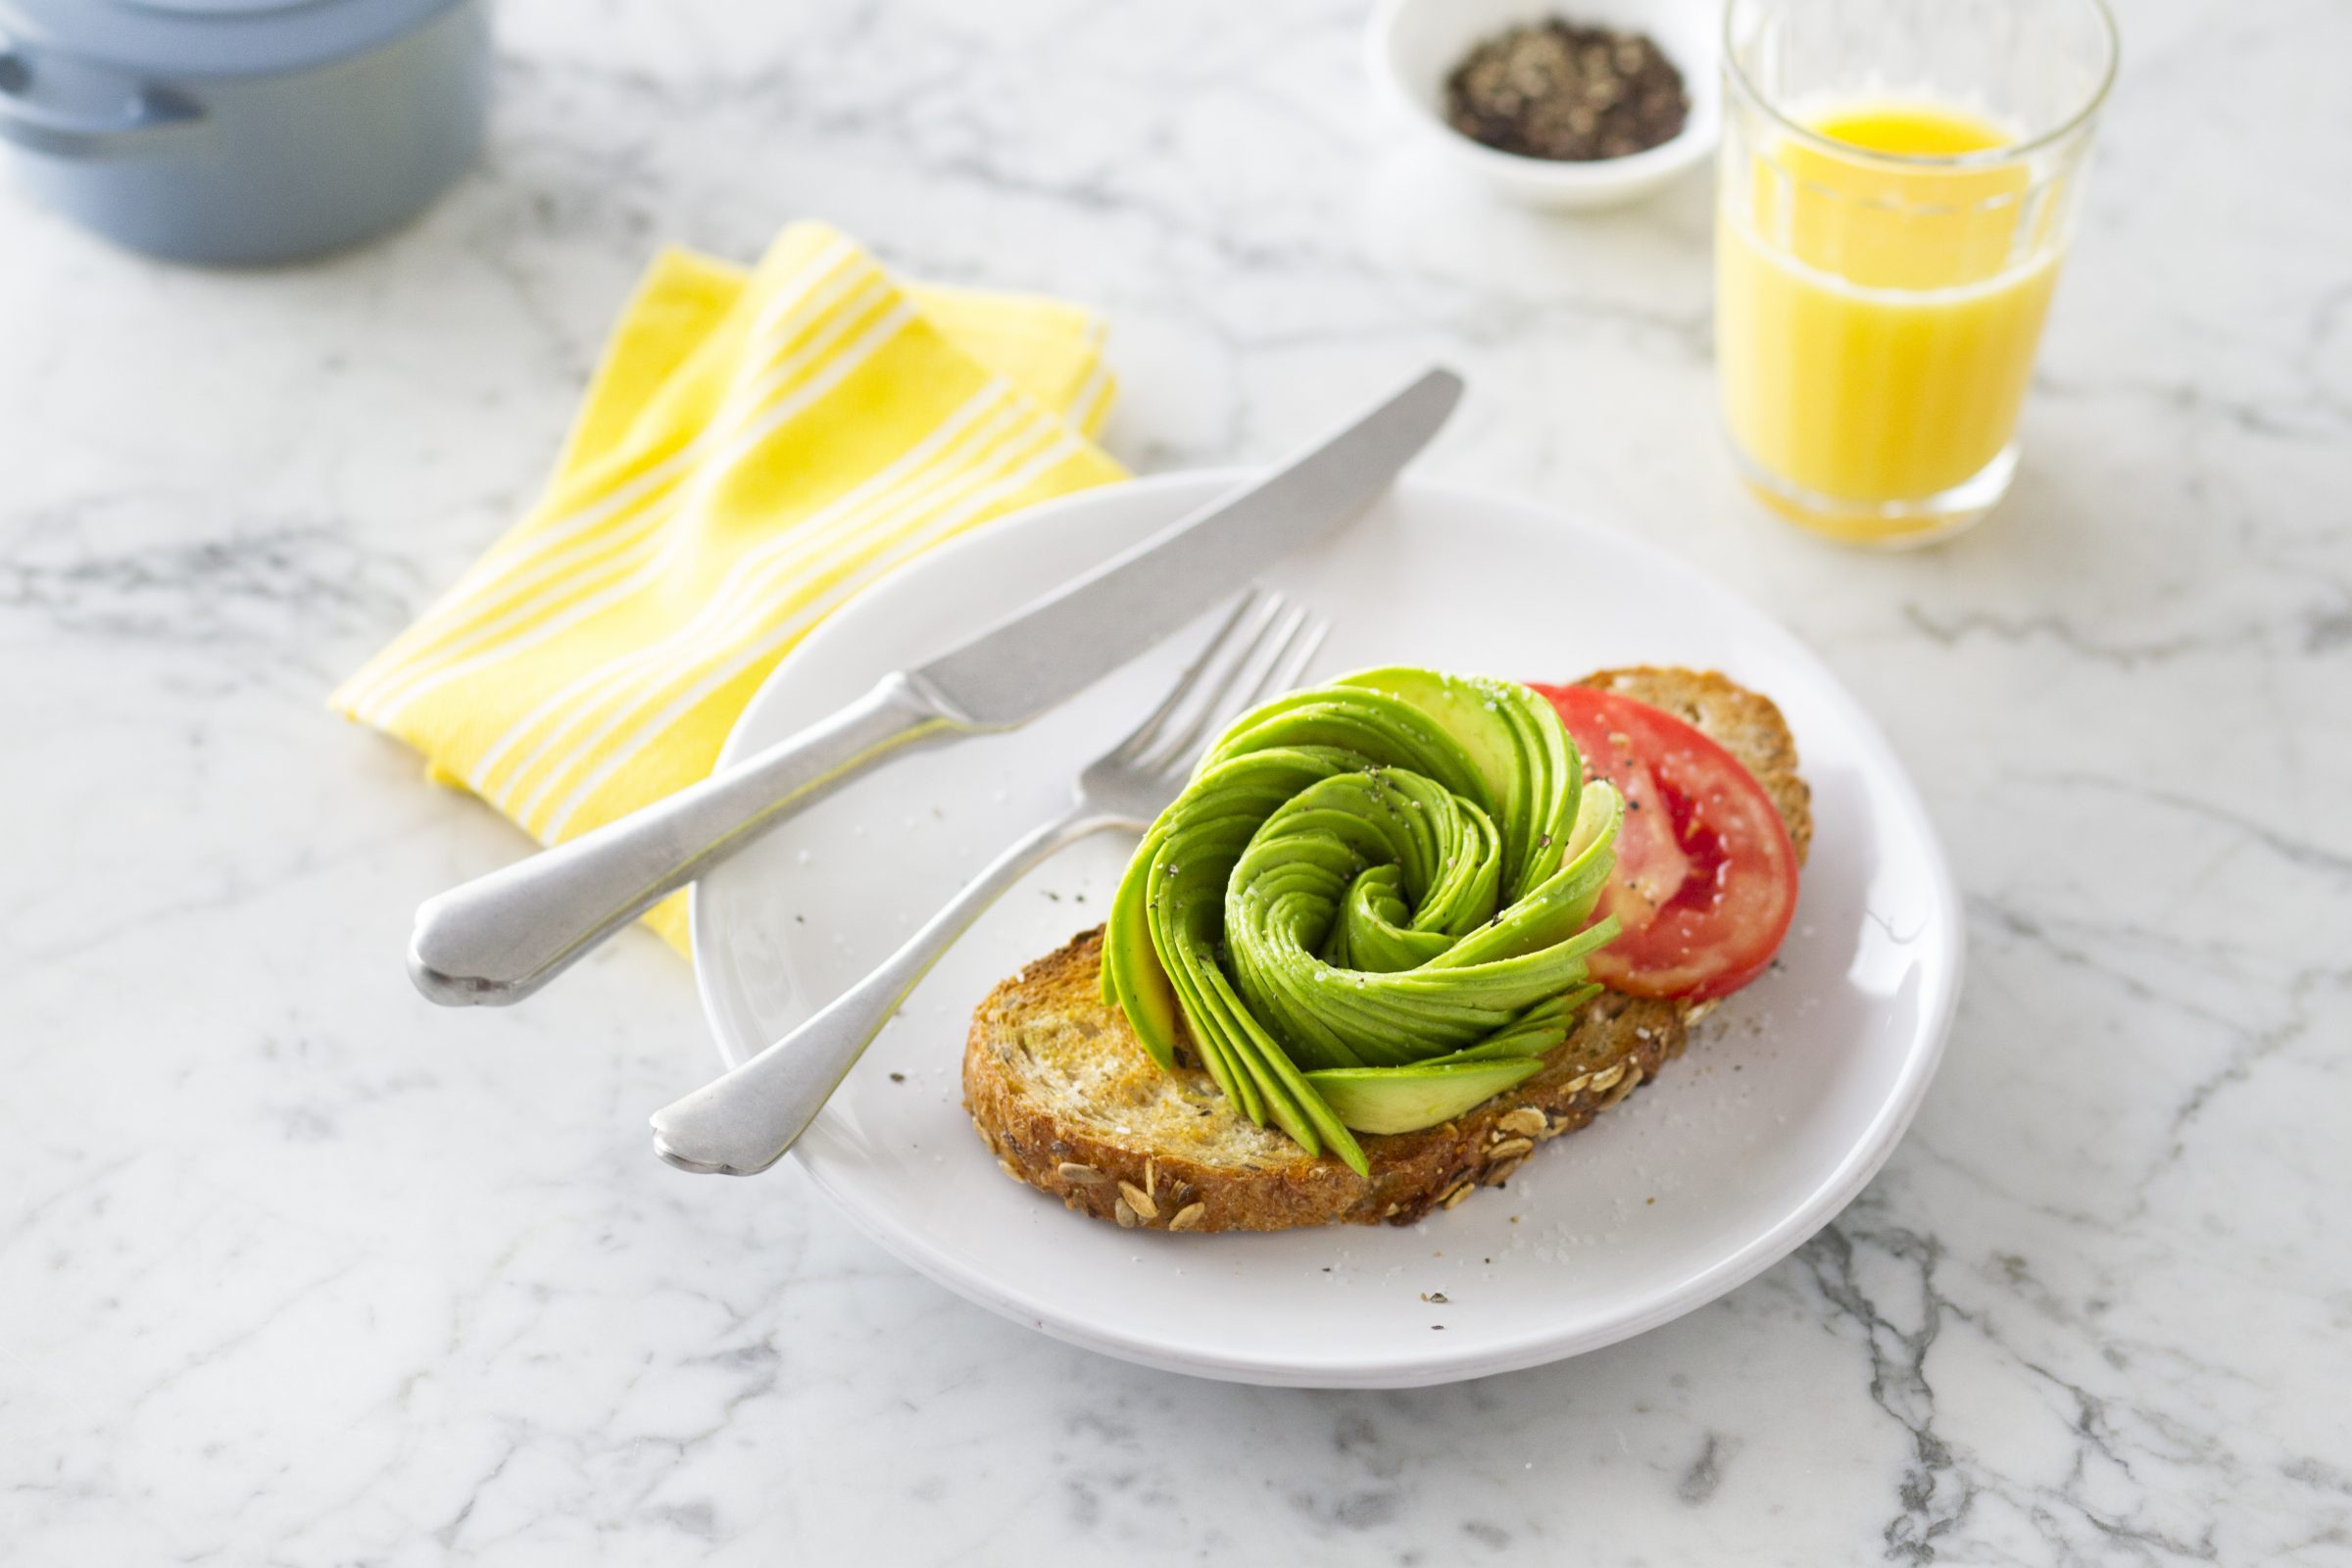 Avocado rose on top of a slice of toast on a plate beside a knife and yellow napkin on marble countertop